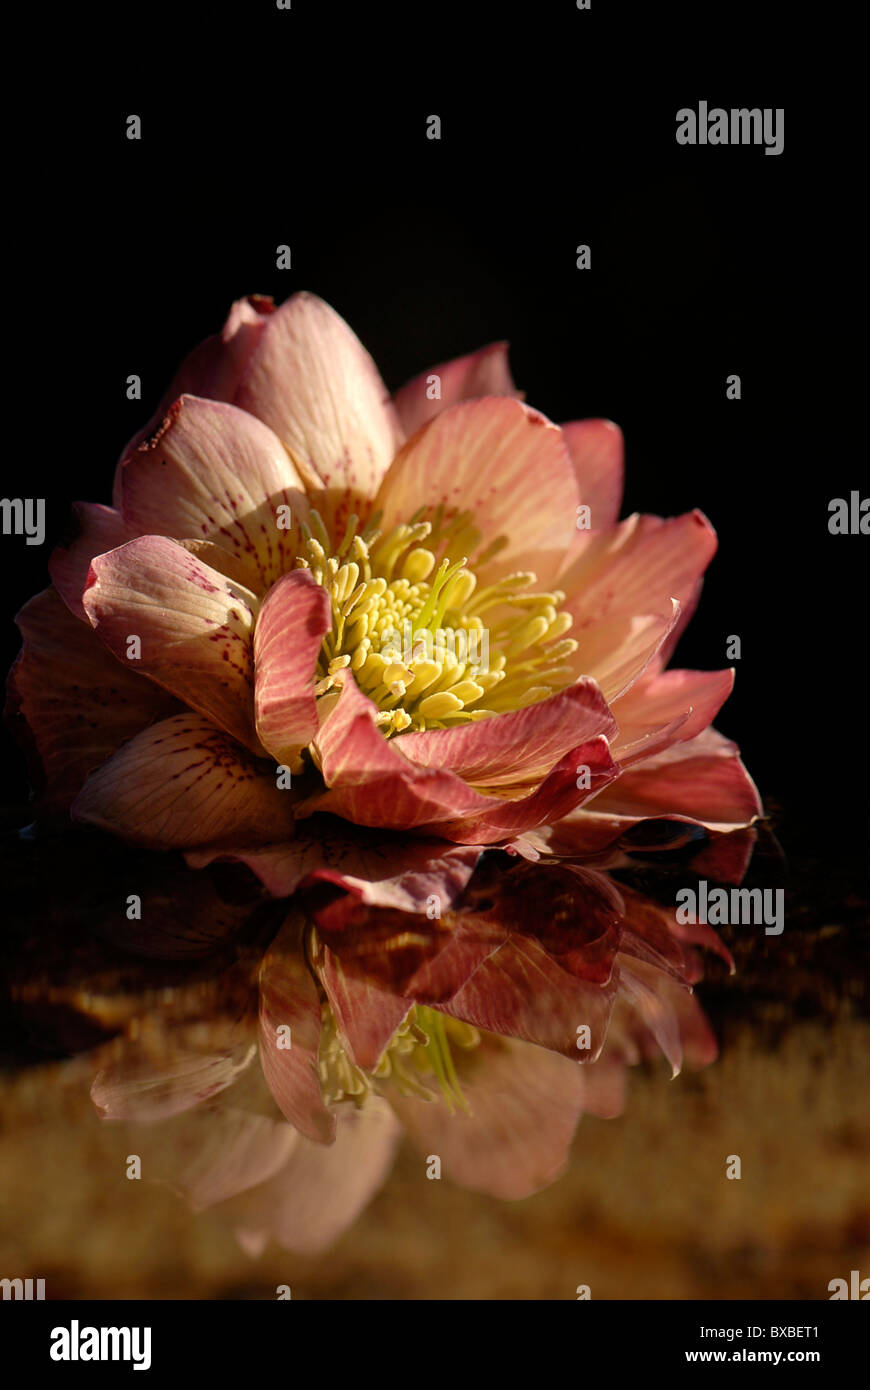 Helleborus x hybridus Double Apricot flower reflected in water Stock Photo